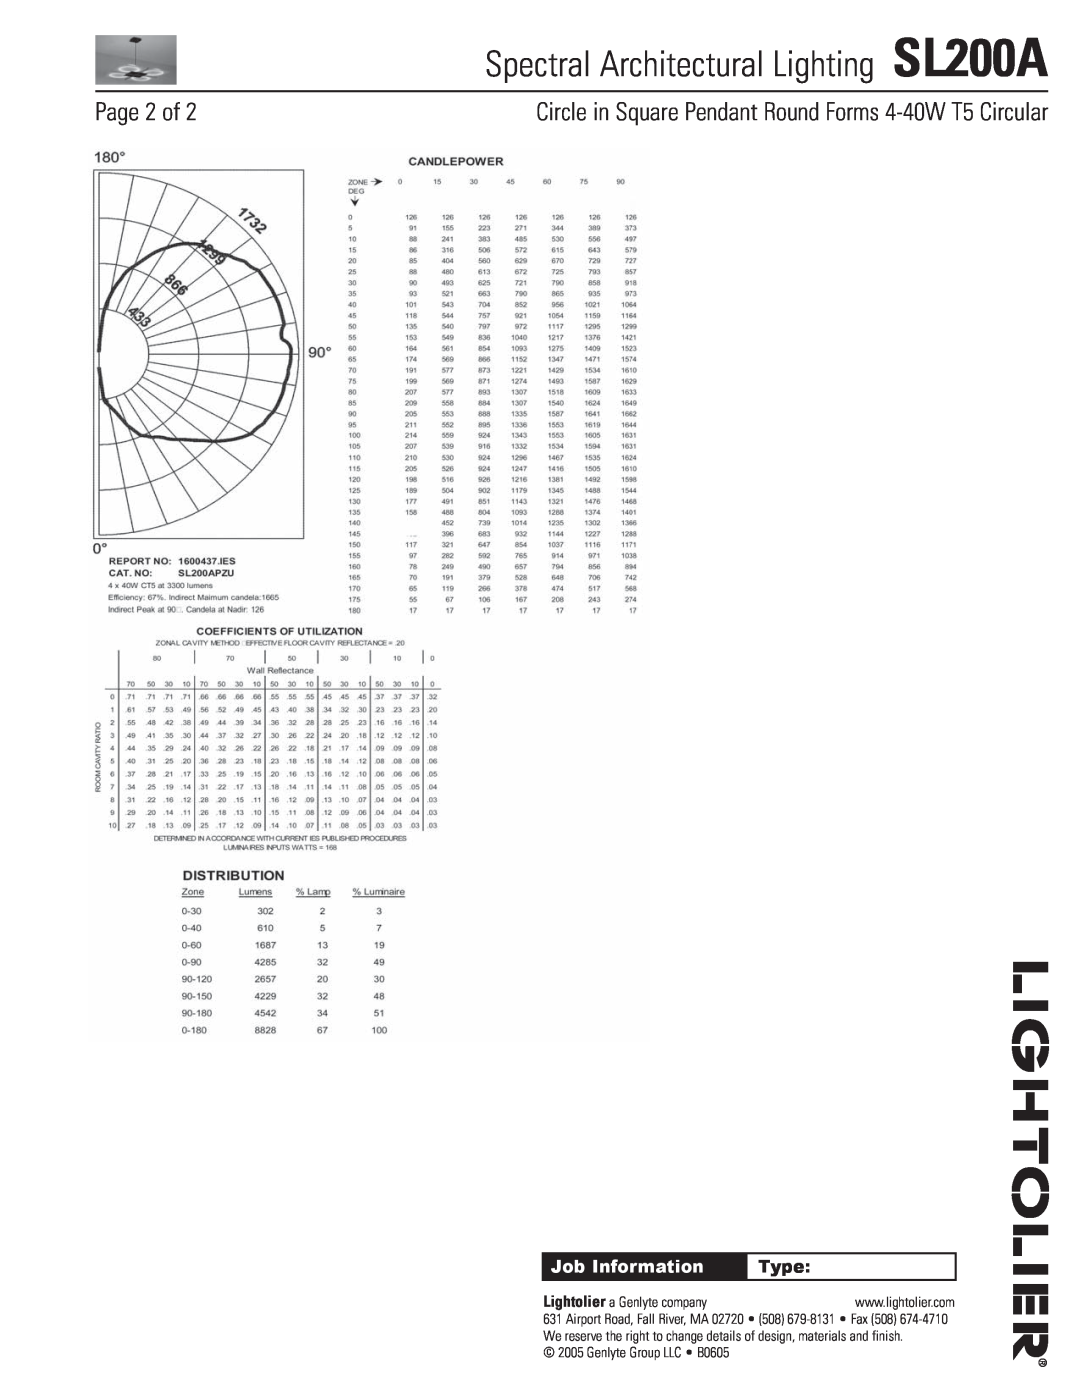 Lightolier manual Page 2 of, Spectral Architectural Lighting SL200A, Job Information, Type 